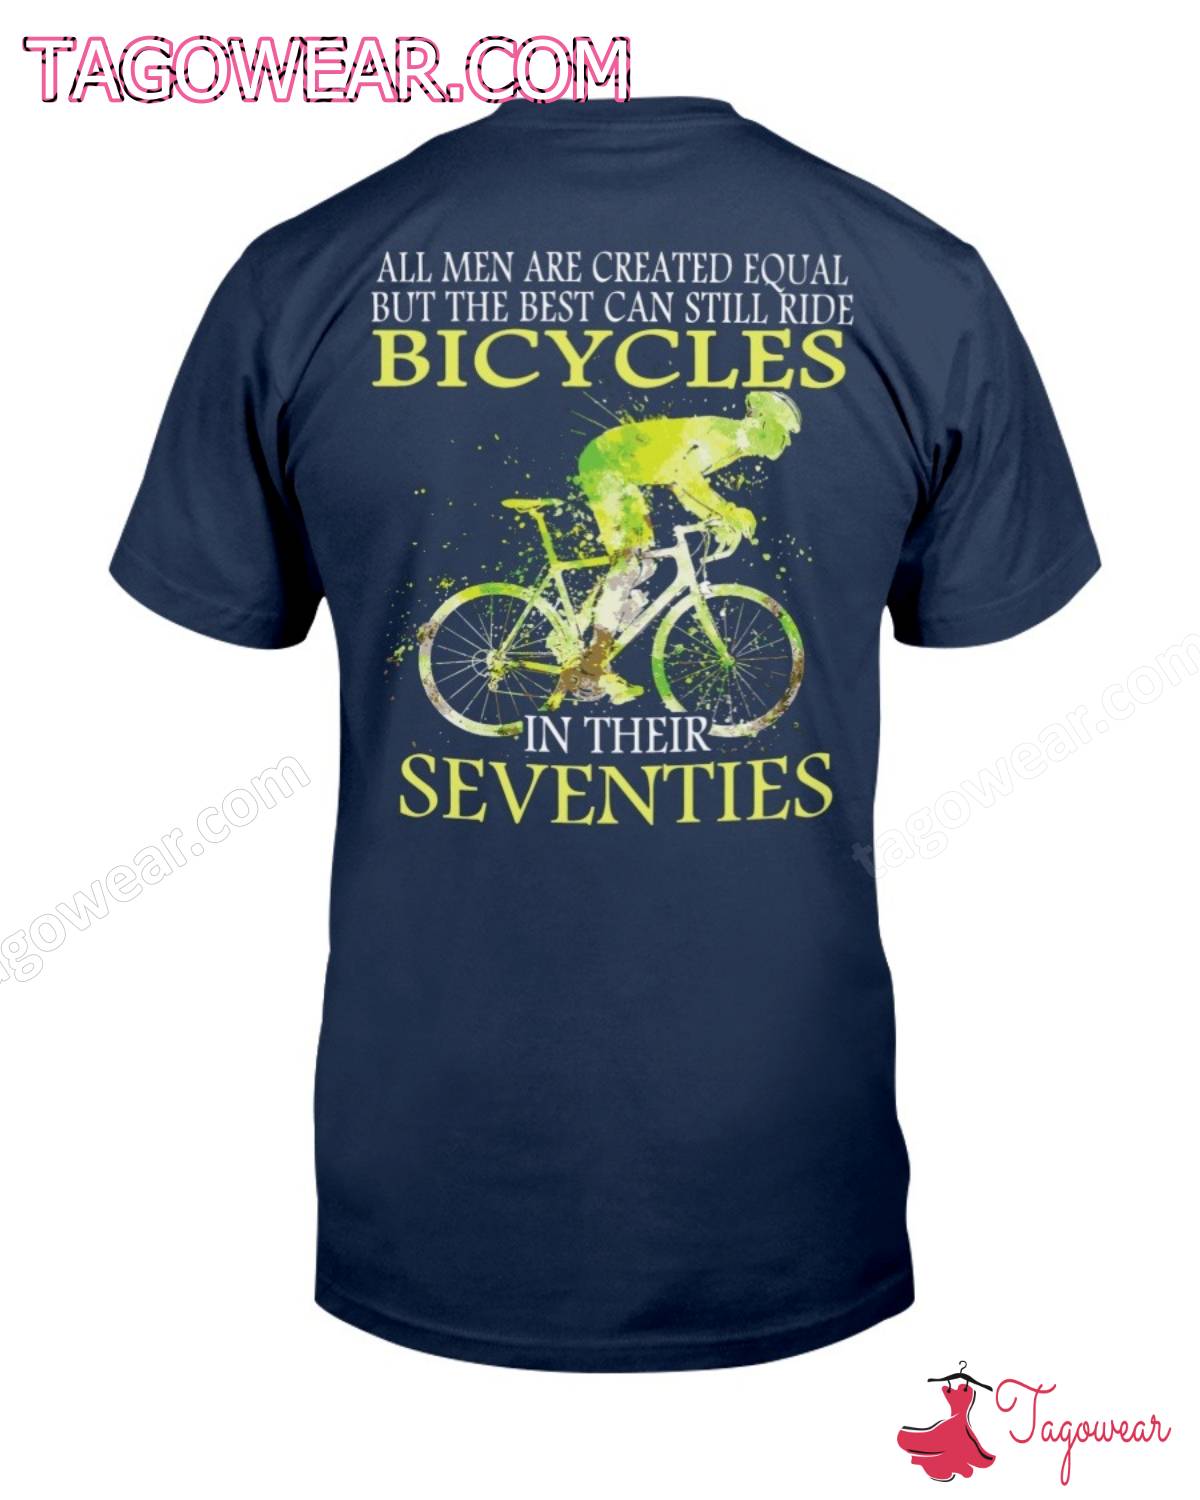 All Men Are Created Equal But The Best Can Still Ride Bicycles In Their Seventies Shirt